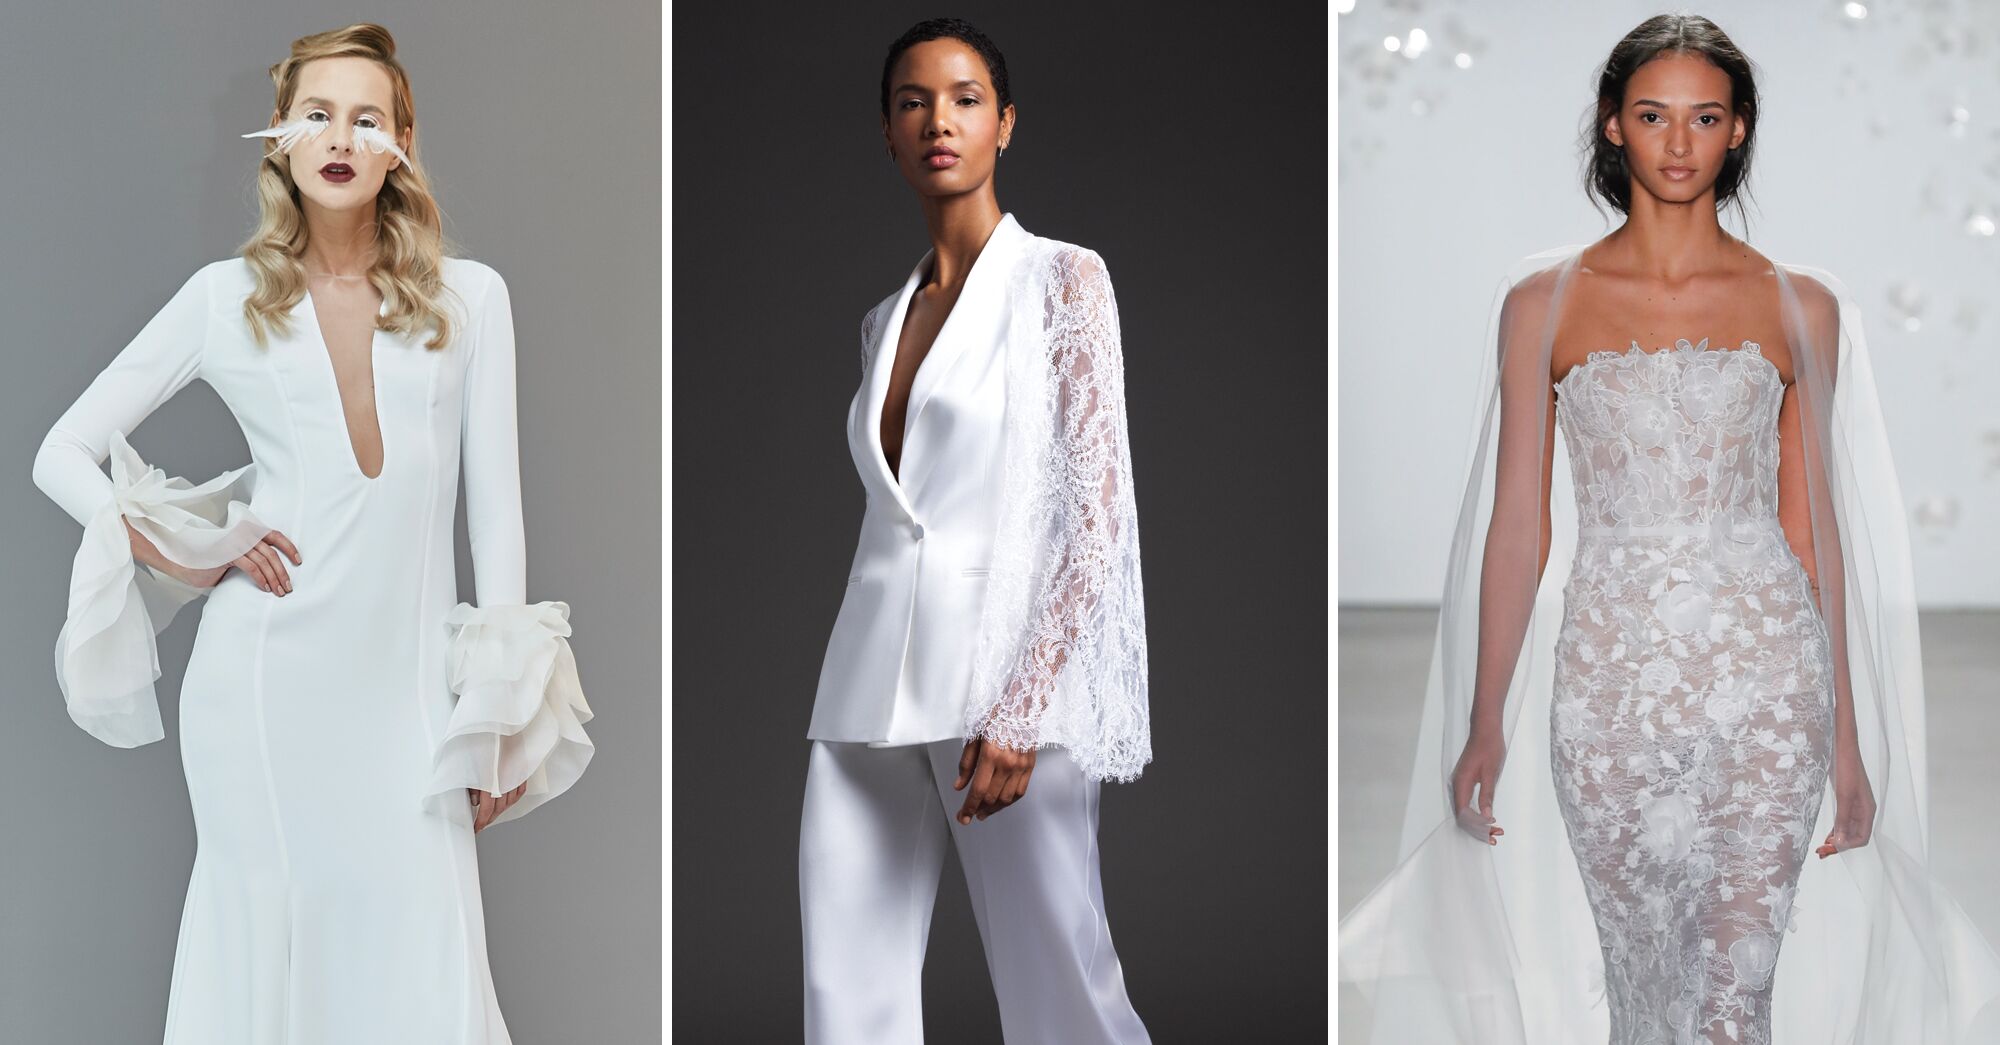 The Biggest Wedding Dress Trends for 2020